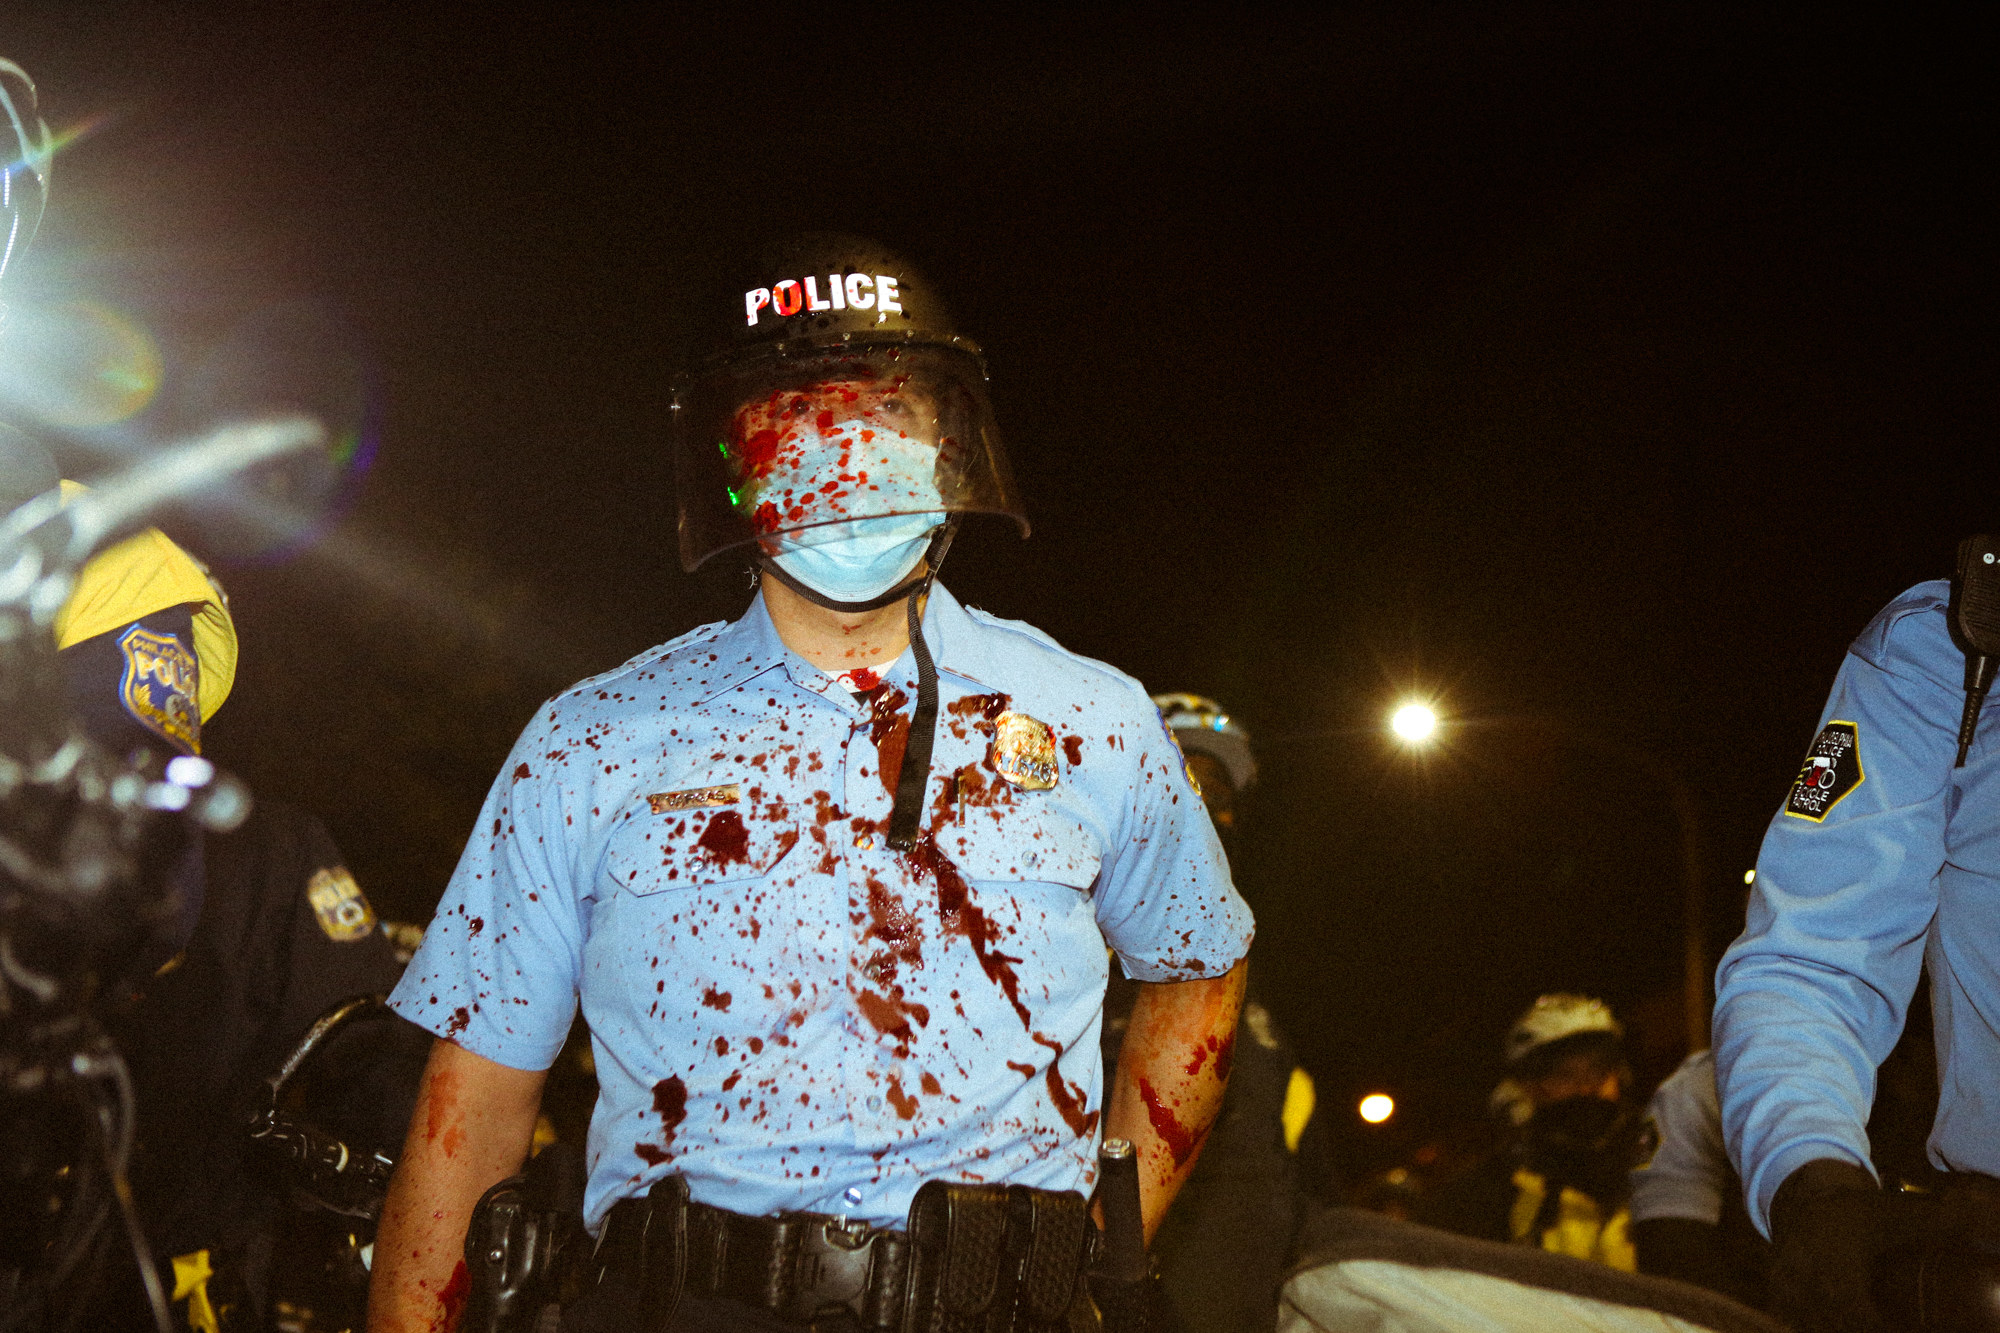 A policeman walking towards the camera, covered in blood